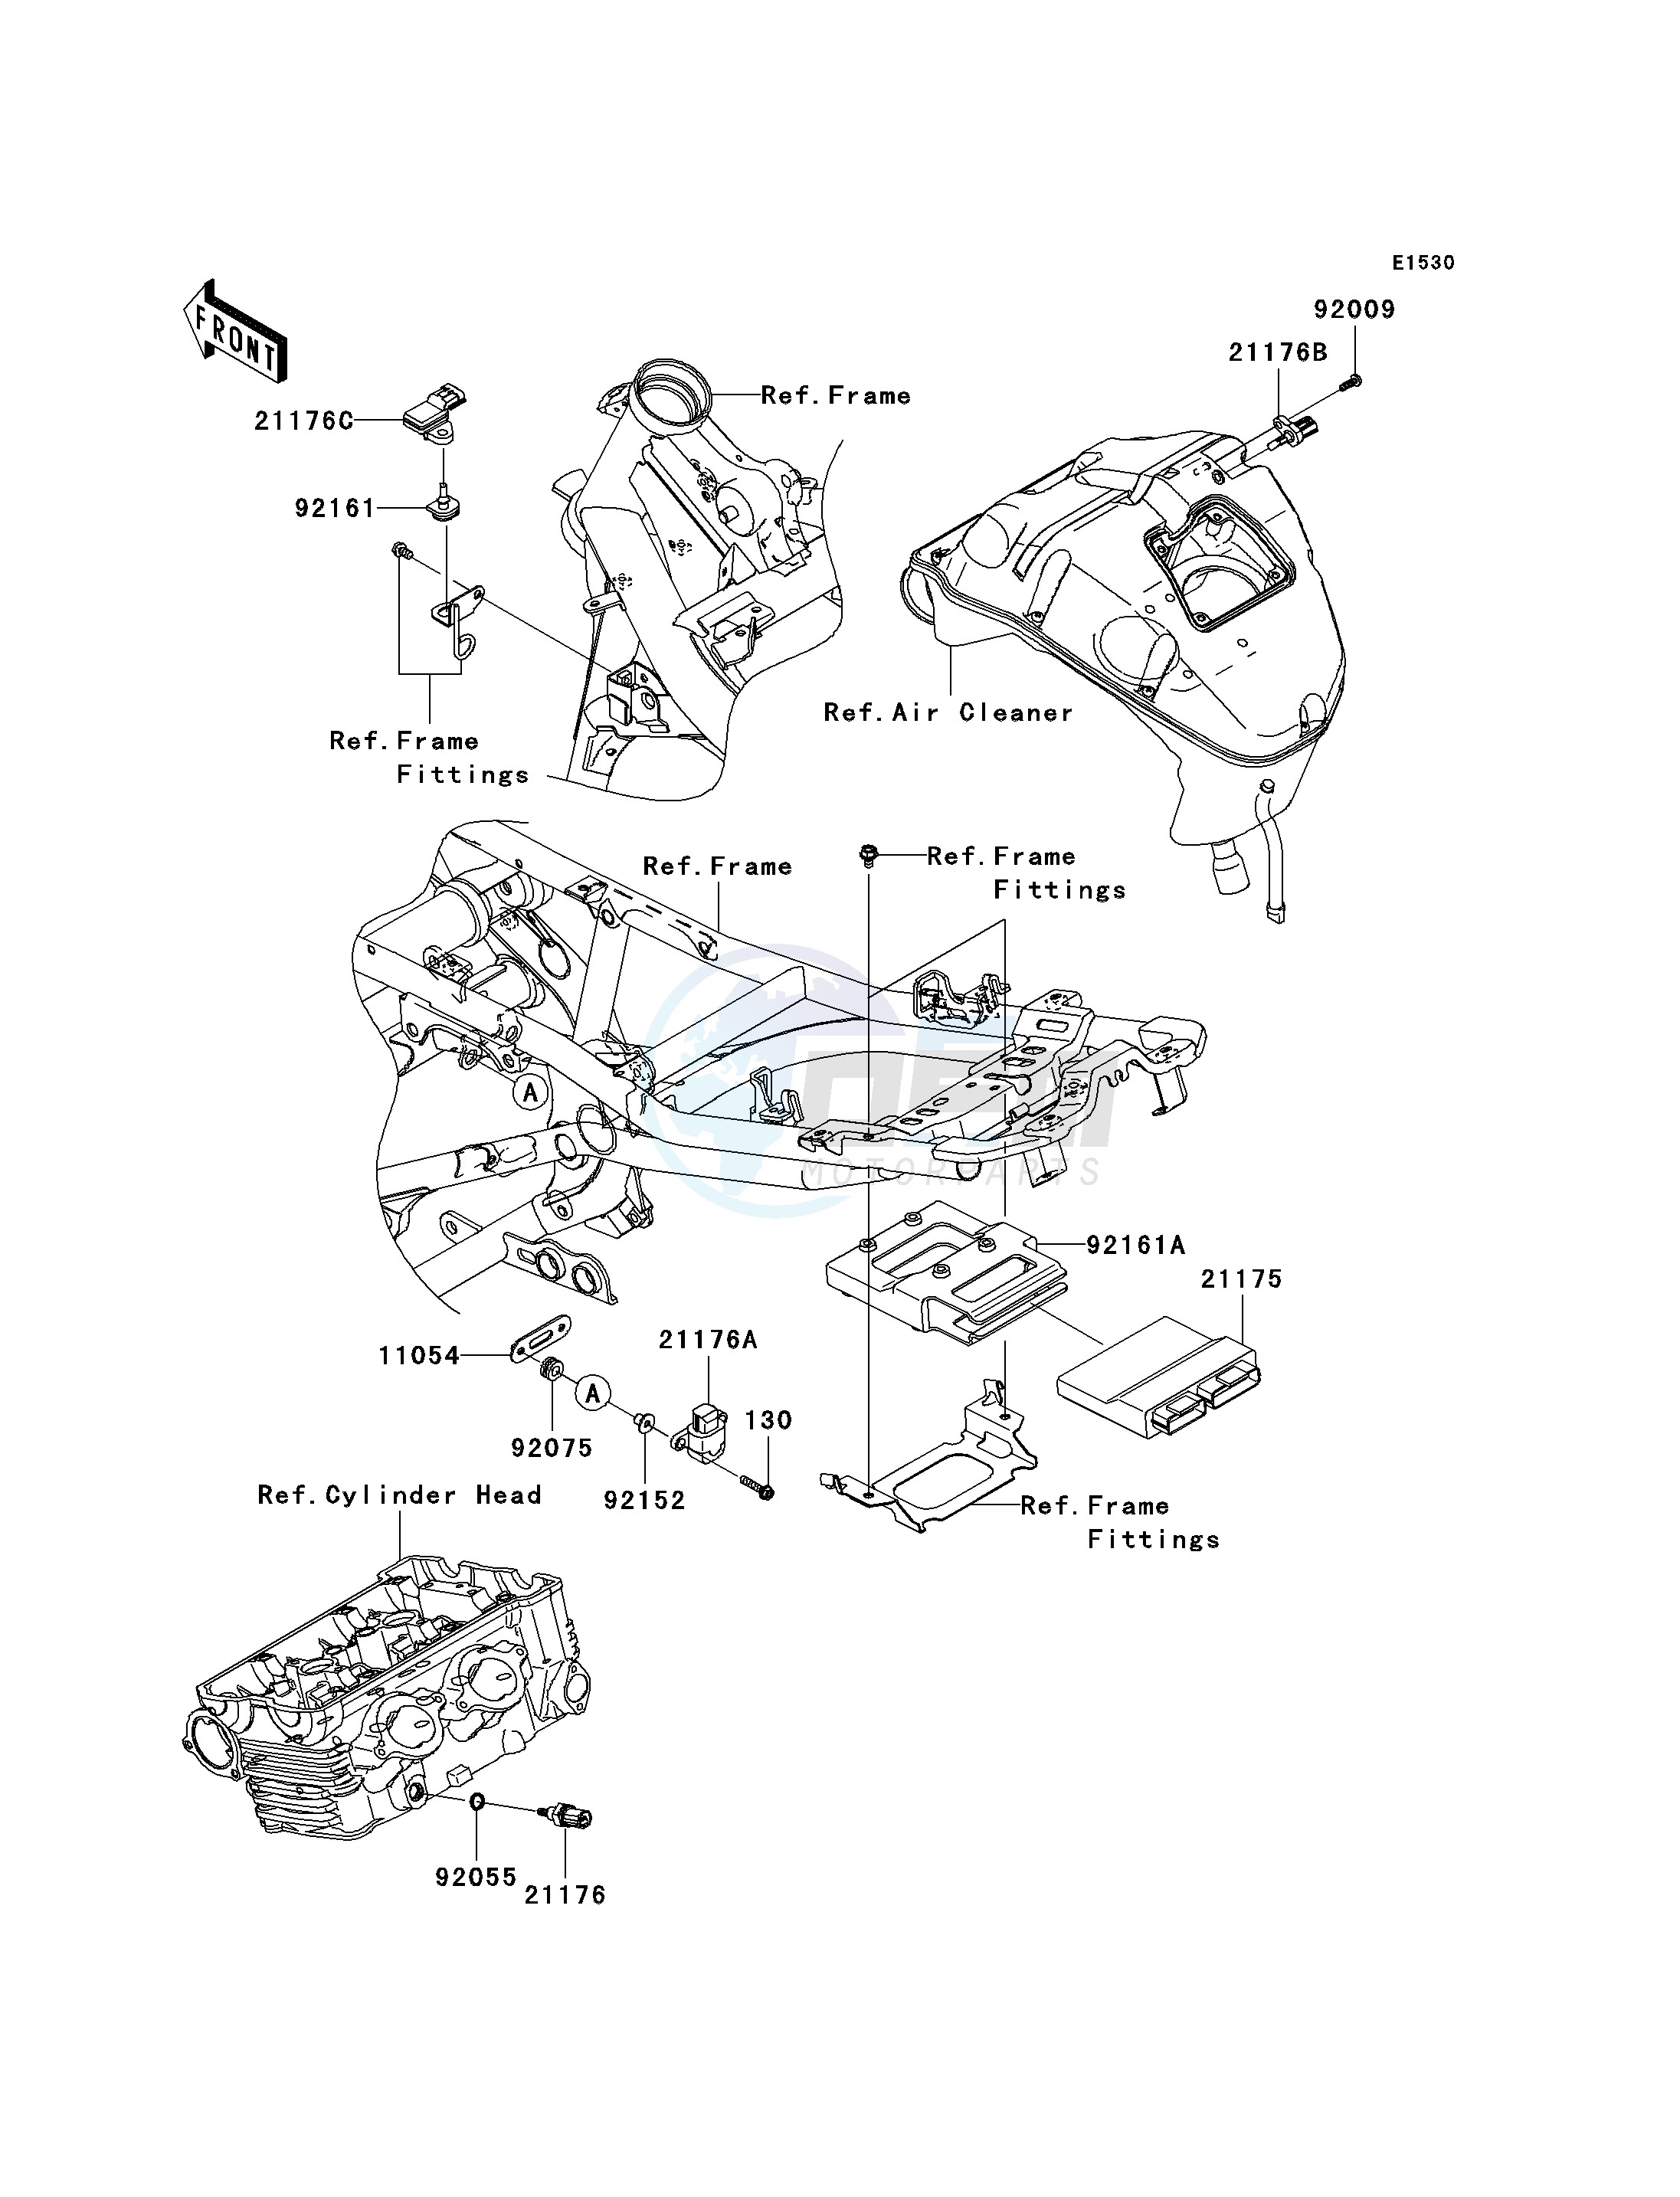 FUEL INJECTION image